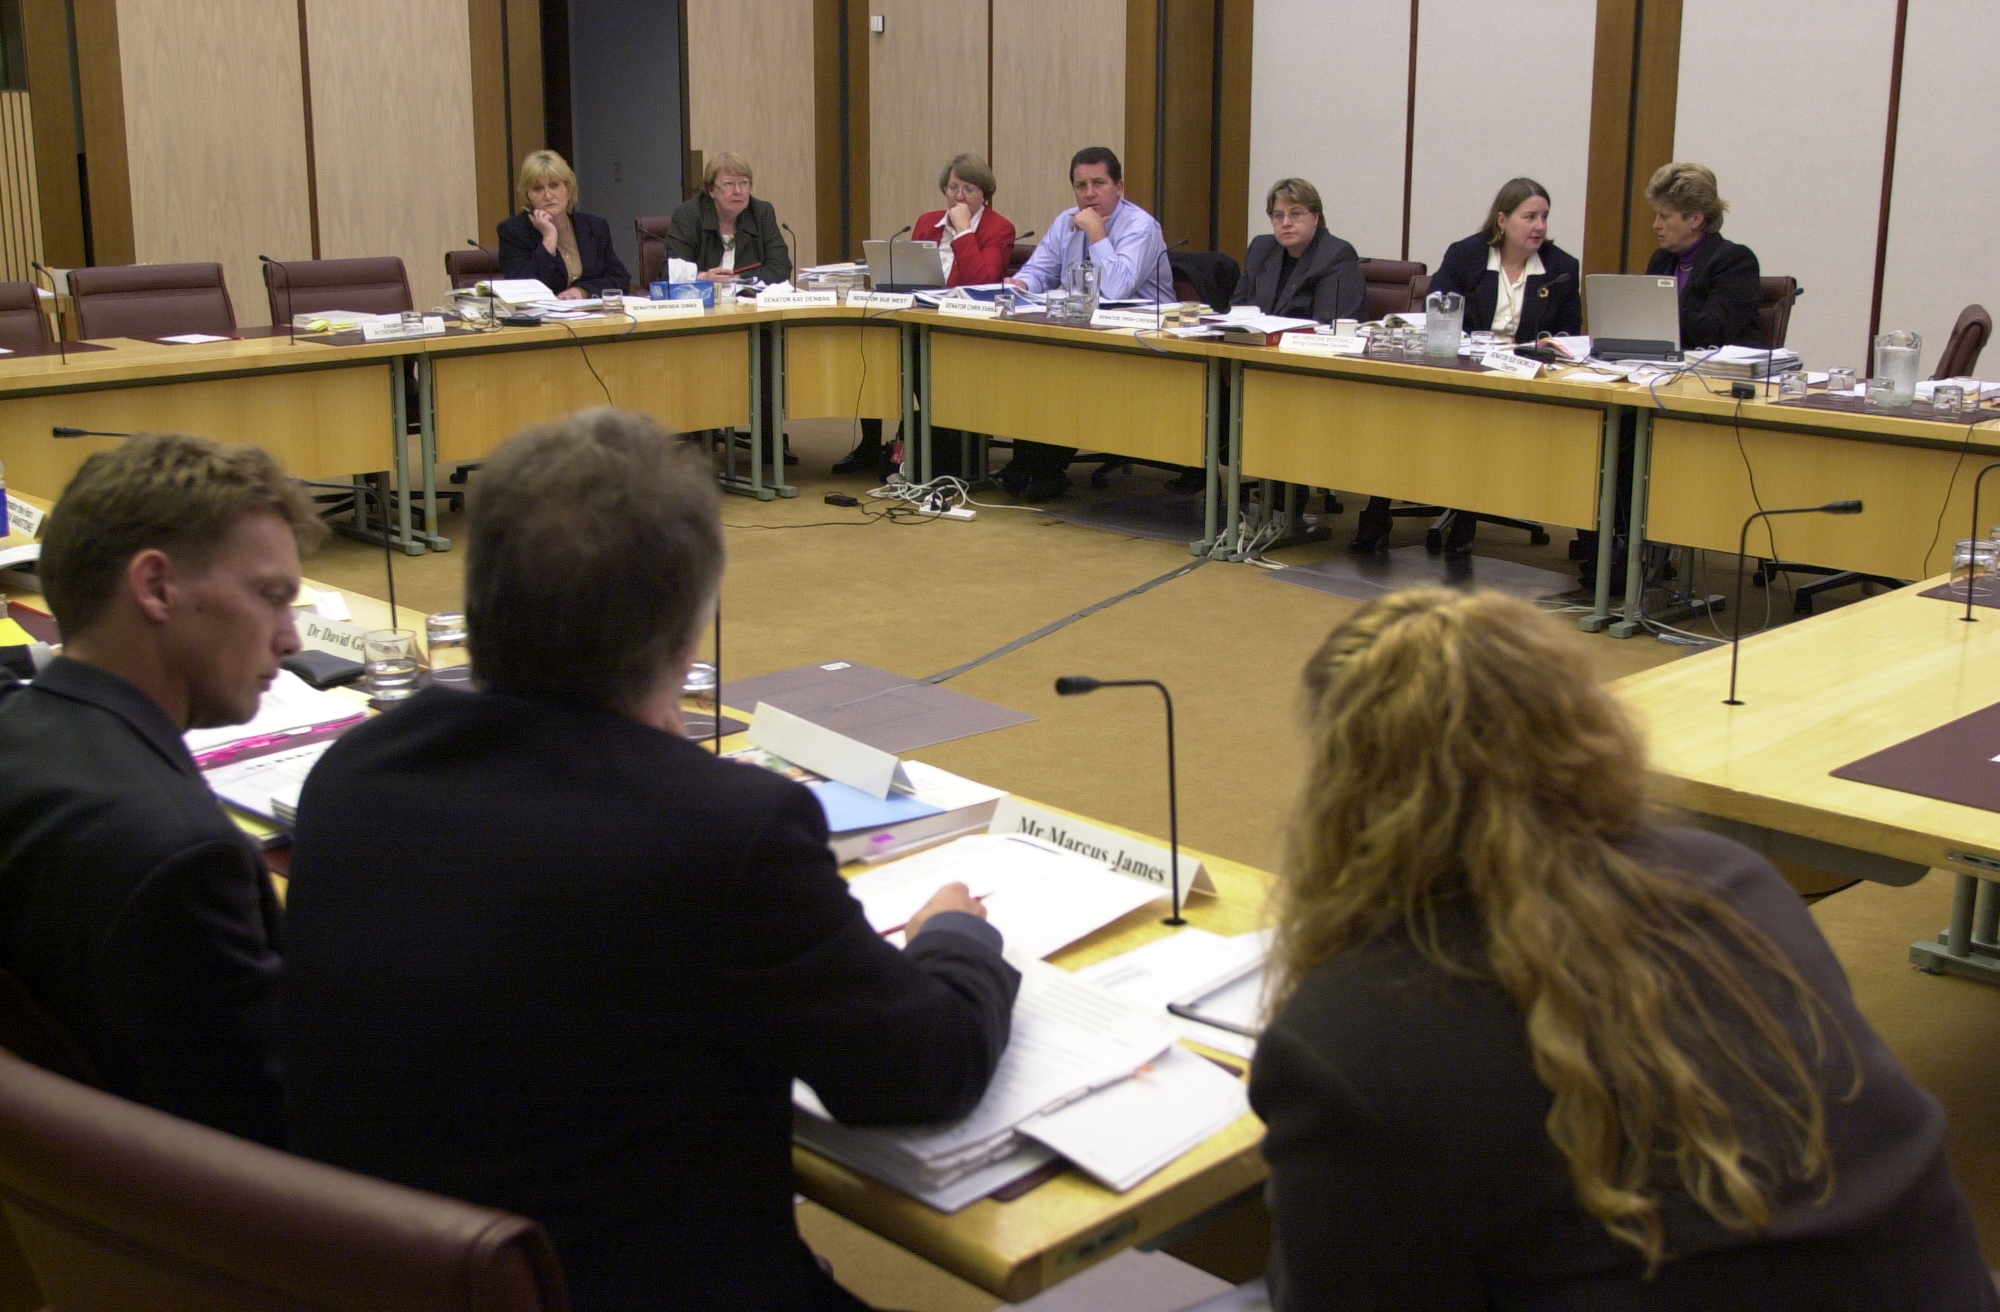 Community Affairs Legislation Committee members questioning officers of the Department of Health and Aged Care, 28 May 2001. Seated facing camera L-R: Senators Brenda Gibbs, Kay Denman, Sue West, Chris Evans and Trish Crossin, Christine McDonald [Acting Secretary] and Senator Sue Knowles [Chair]. DPS Auspic.